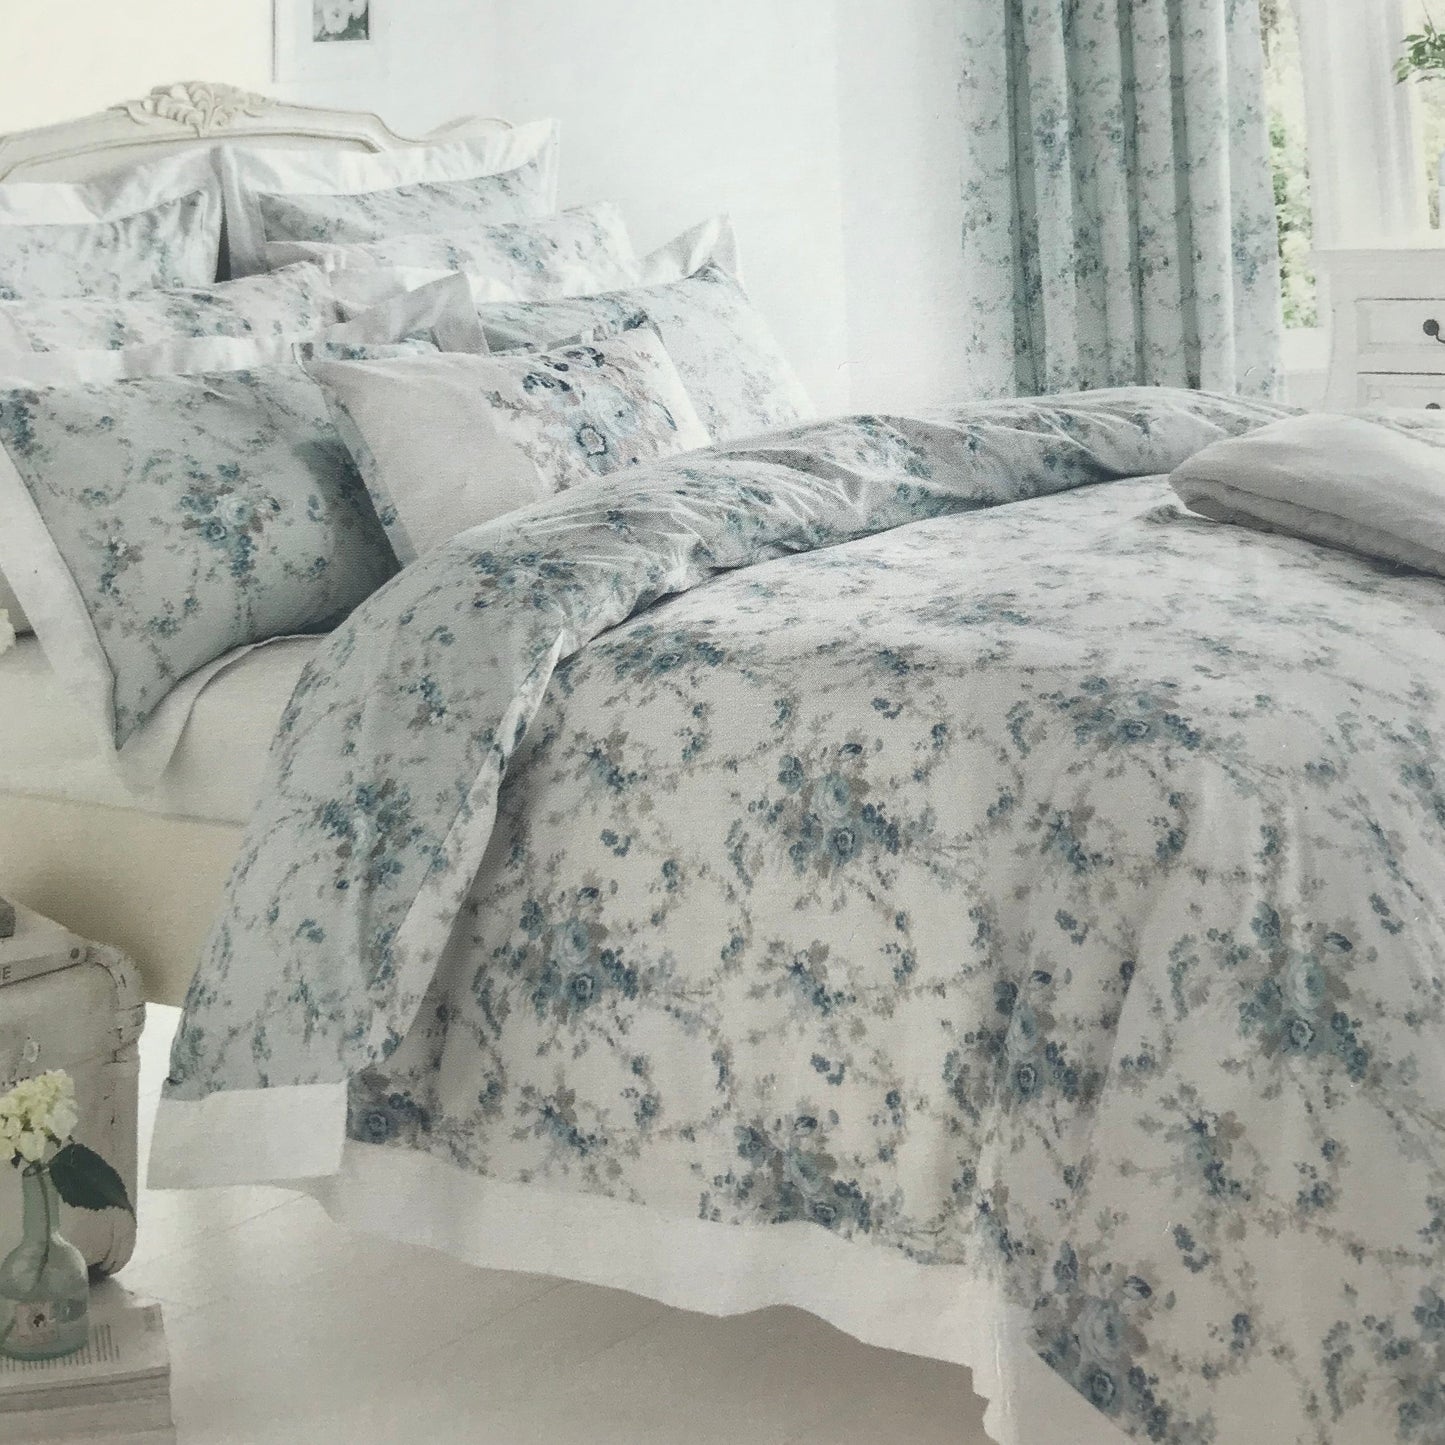 Garland Bouquet Duvet Cover and Pillowcases by Dorma